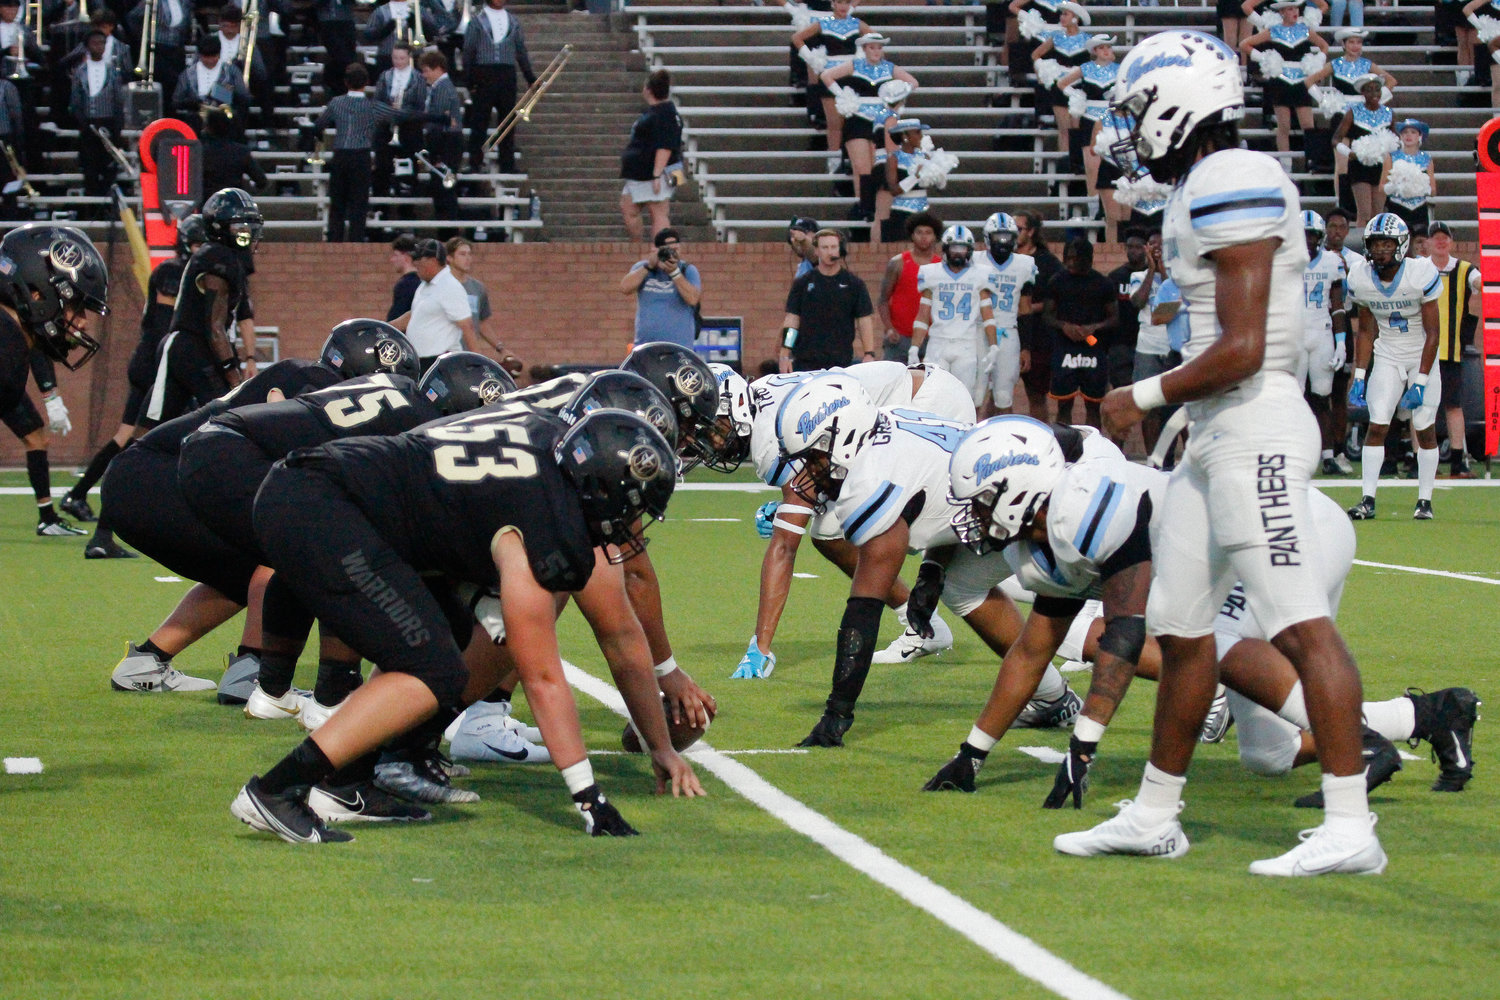 Paetow and Jordan line up for a play during Friday’s game between Jordan and Paetow at Rhodes Stadium.